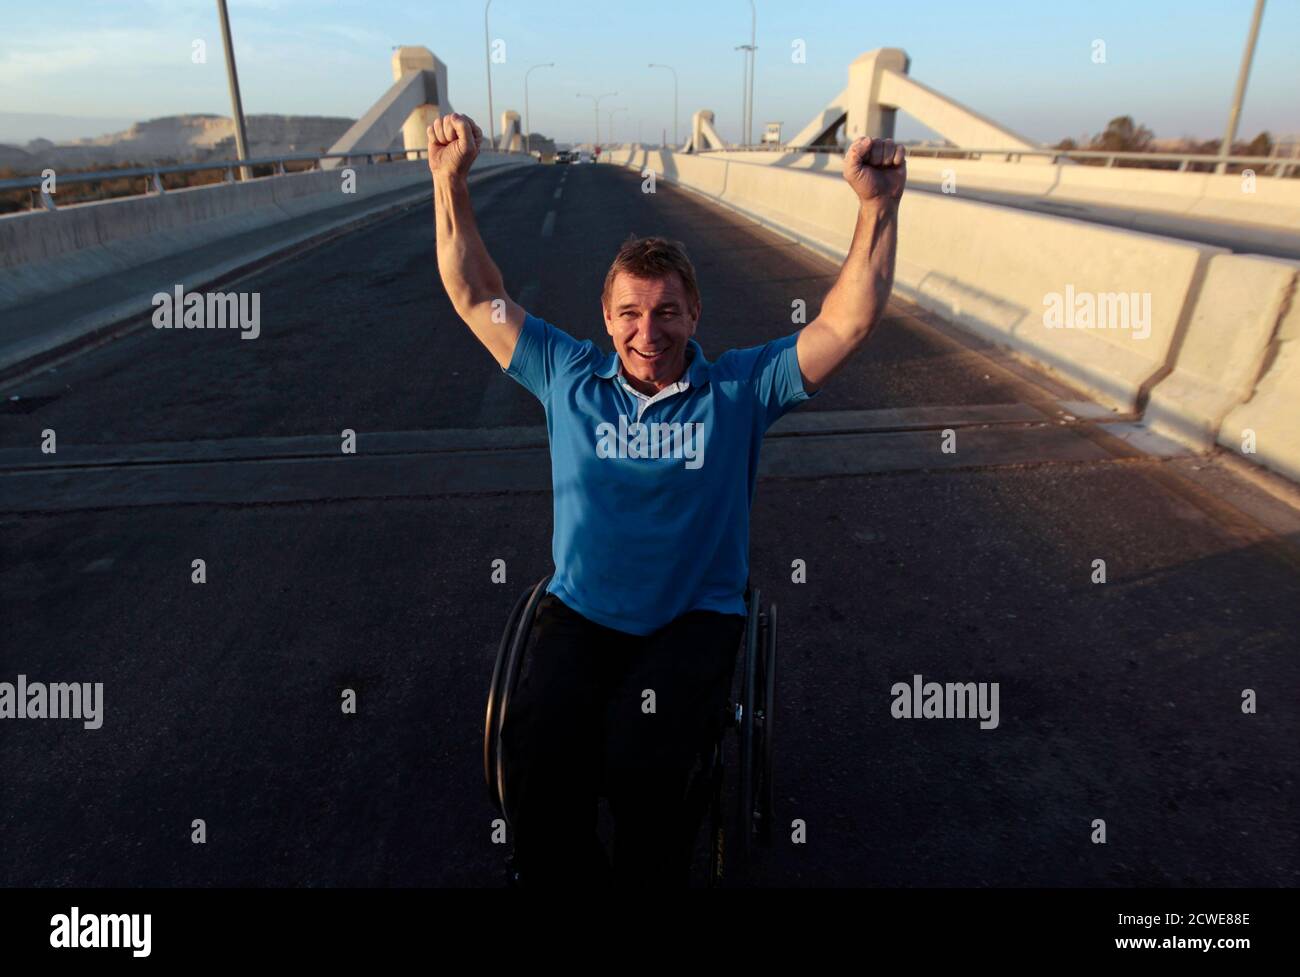 Canadian wheelchair athlete Rick Hansen raises his arms after crossing over the Israeli-controlled Allenby bridge from Jordan into the West Bank, December 1, 2010, as part of the 25th anniversary celebrations for his Man In Motion tour. Hansen symbolically crossed the bridge on Wednesday to mark his achievement of having wheeled across the bridge in 1985, as part of his international tour to raise funds for spinal cord injury research. REUTERS/Baz Ratner (WEST BANK - Tags: ANNIVERSARY SPORT IMAGES OF THE DAY) Stock Photo